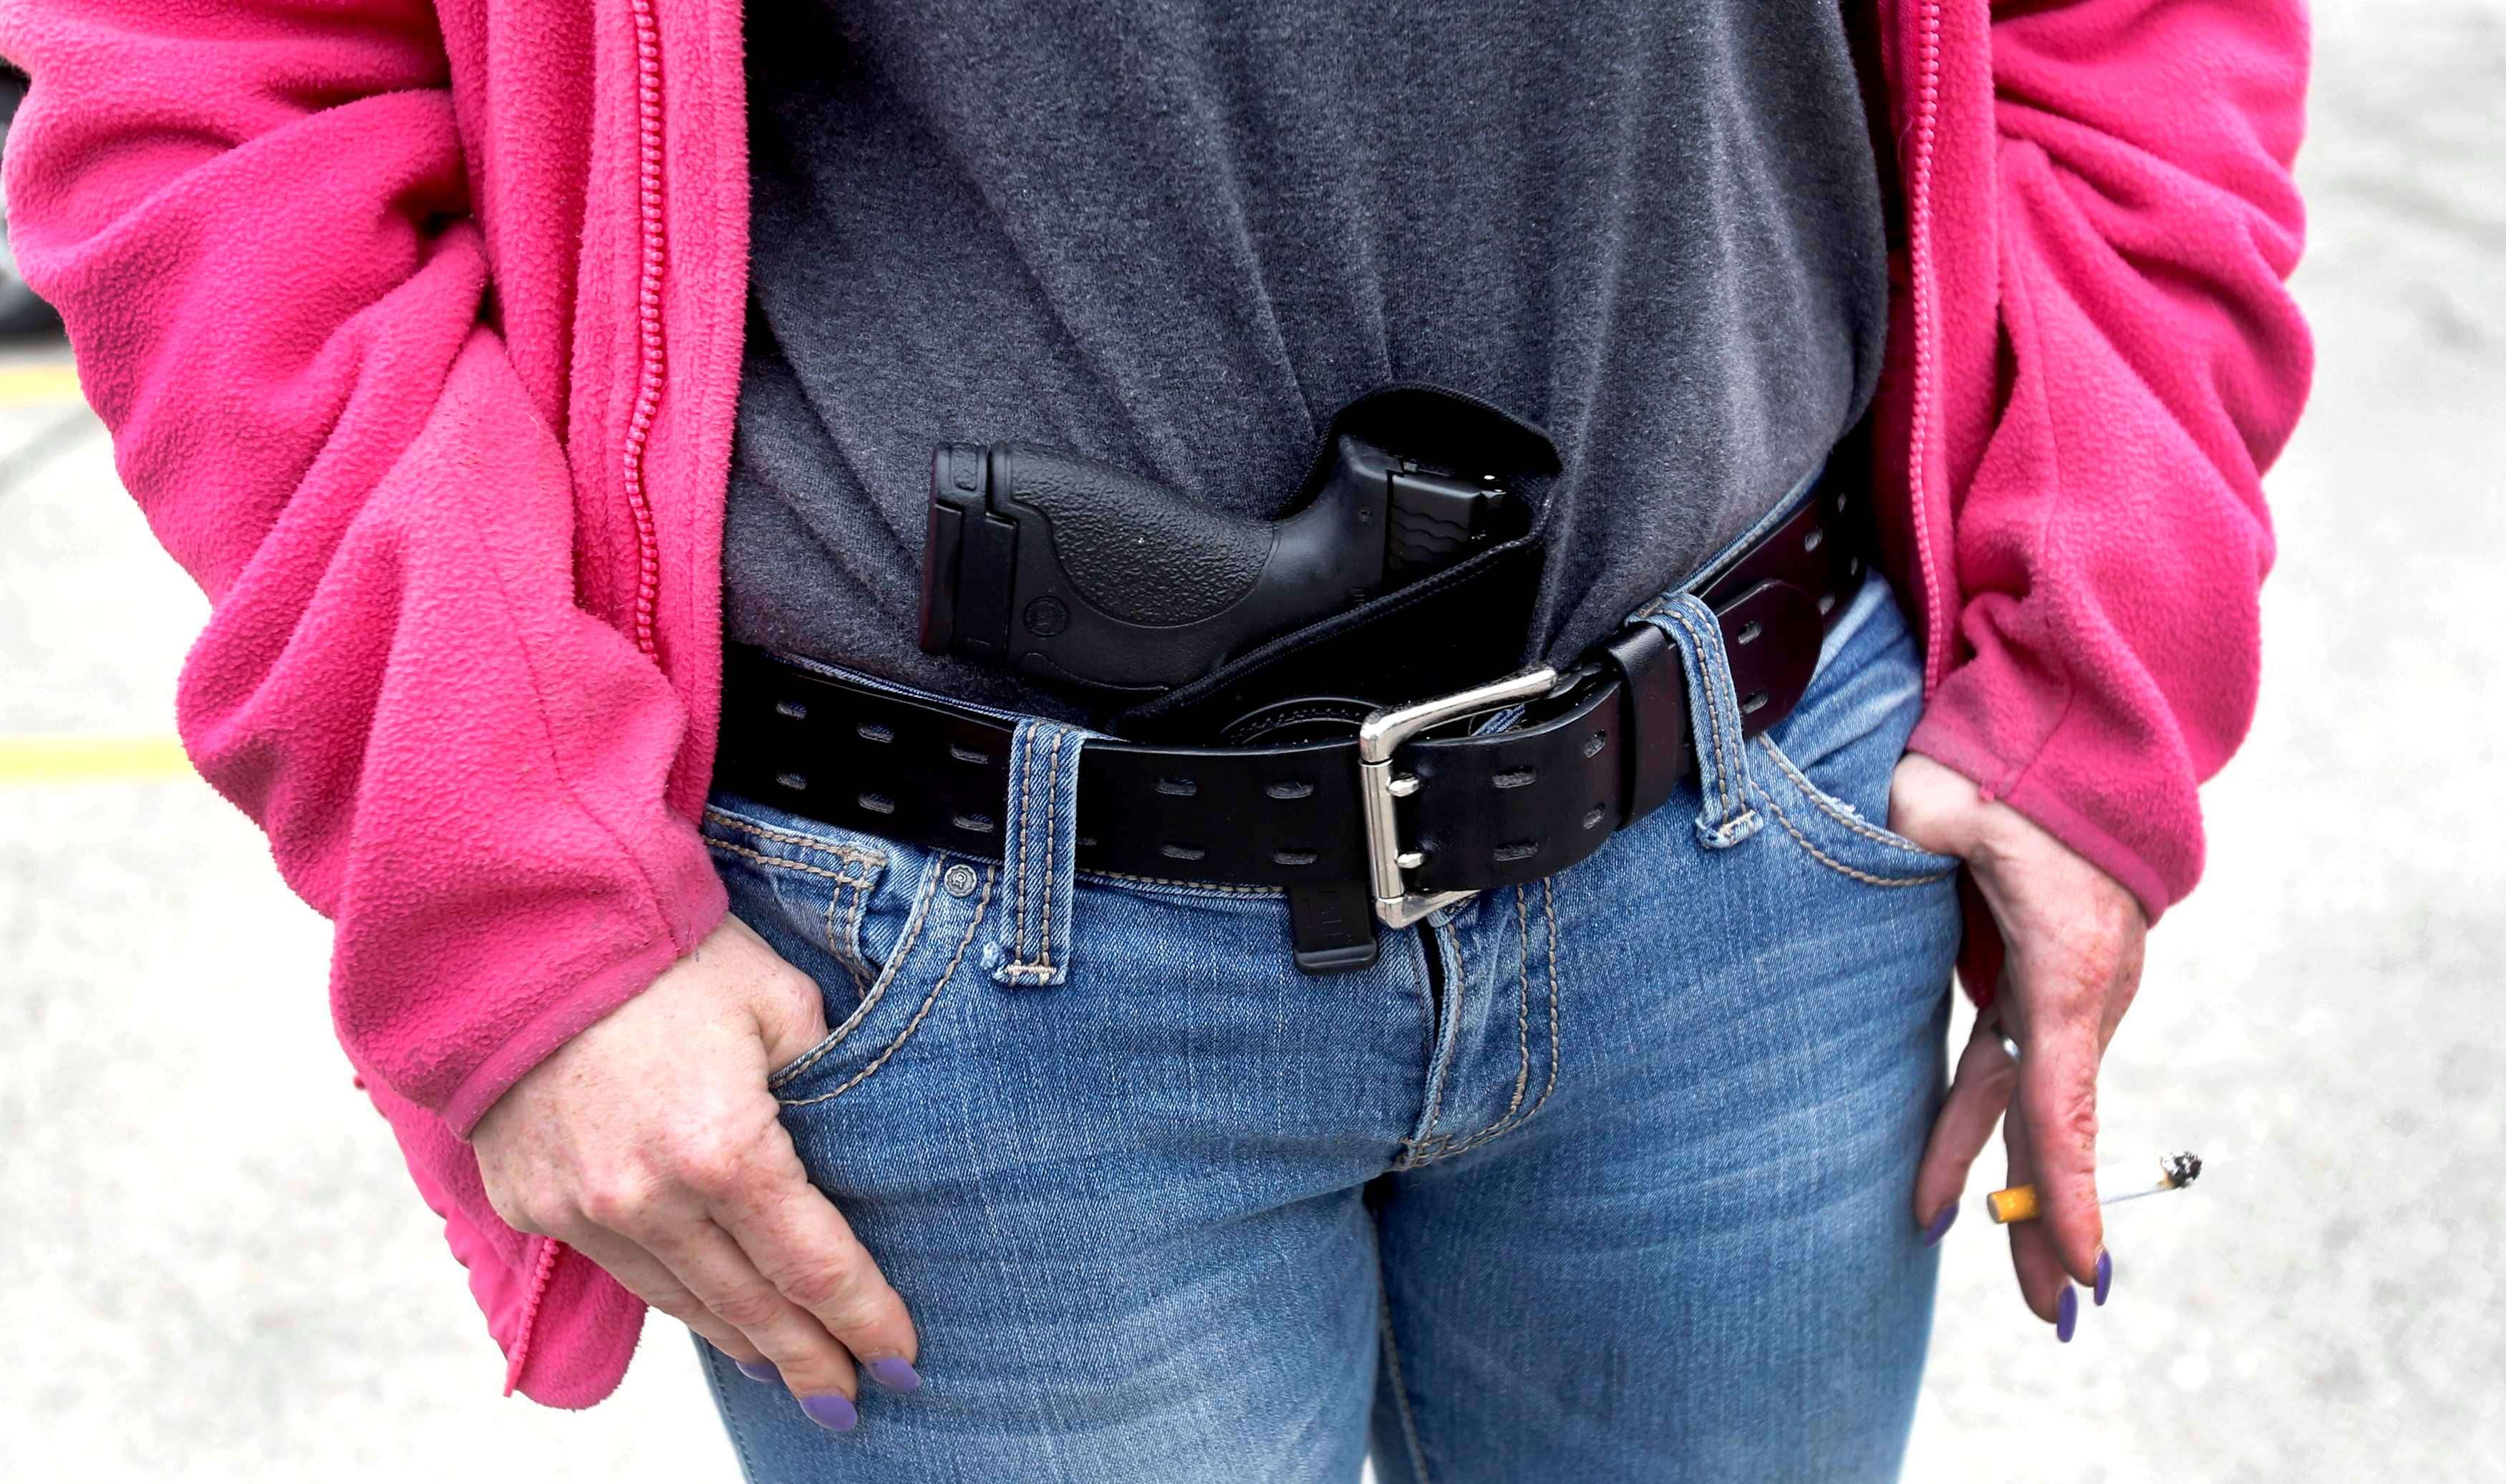 Gloria Lincoln-Thompson carries her 9mm Smith & Wesson pistol in her waist band during a rally in support of the Michigan Open Carry gun law in Romulus, Michigan April 27, 2014. Unlike the subject of this blog post, she was apparently not singing Hakuna Matata at the time. REUTERS/Rebecca Cook (UNITED STATES - Tags: CIVIL UNREST POLITICS SOCIETY TPX IMAGES OF THE DAY)